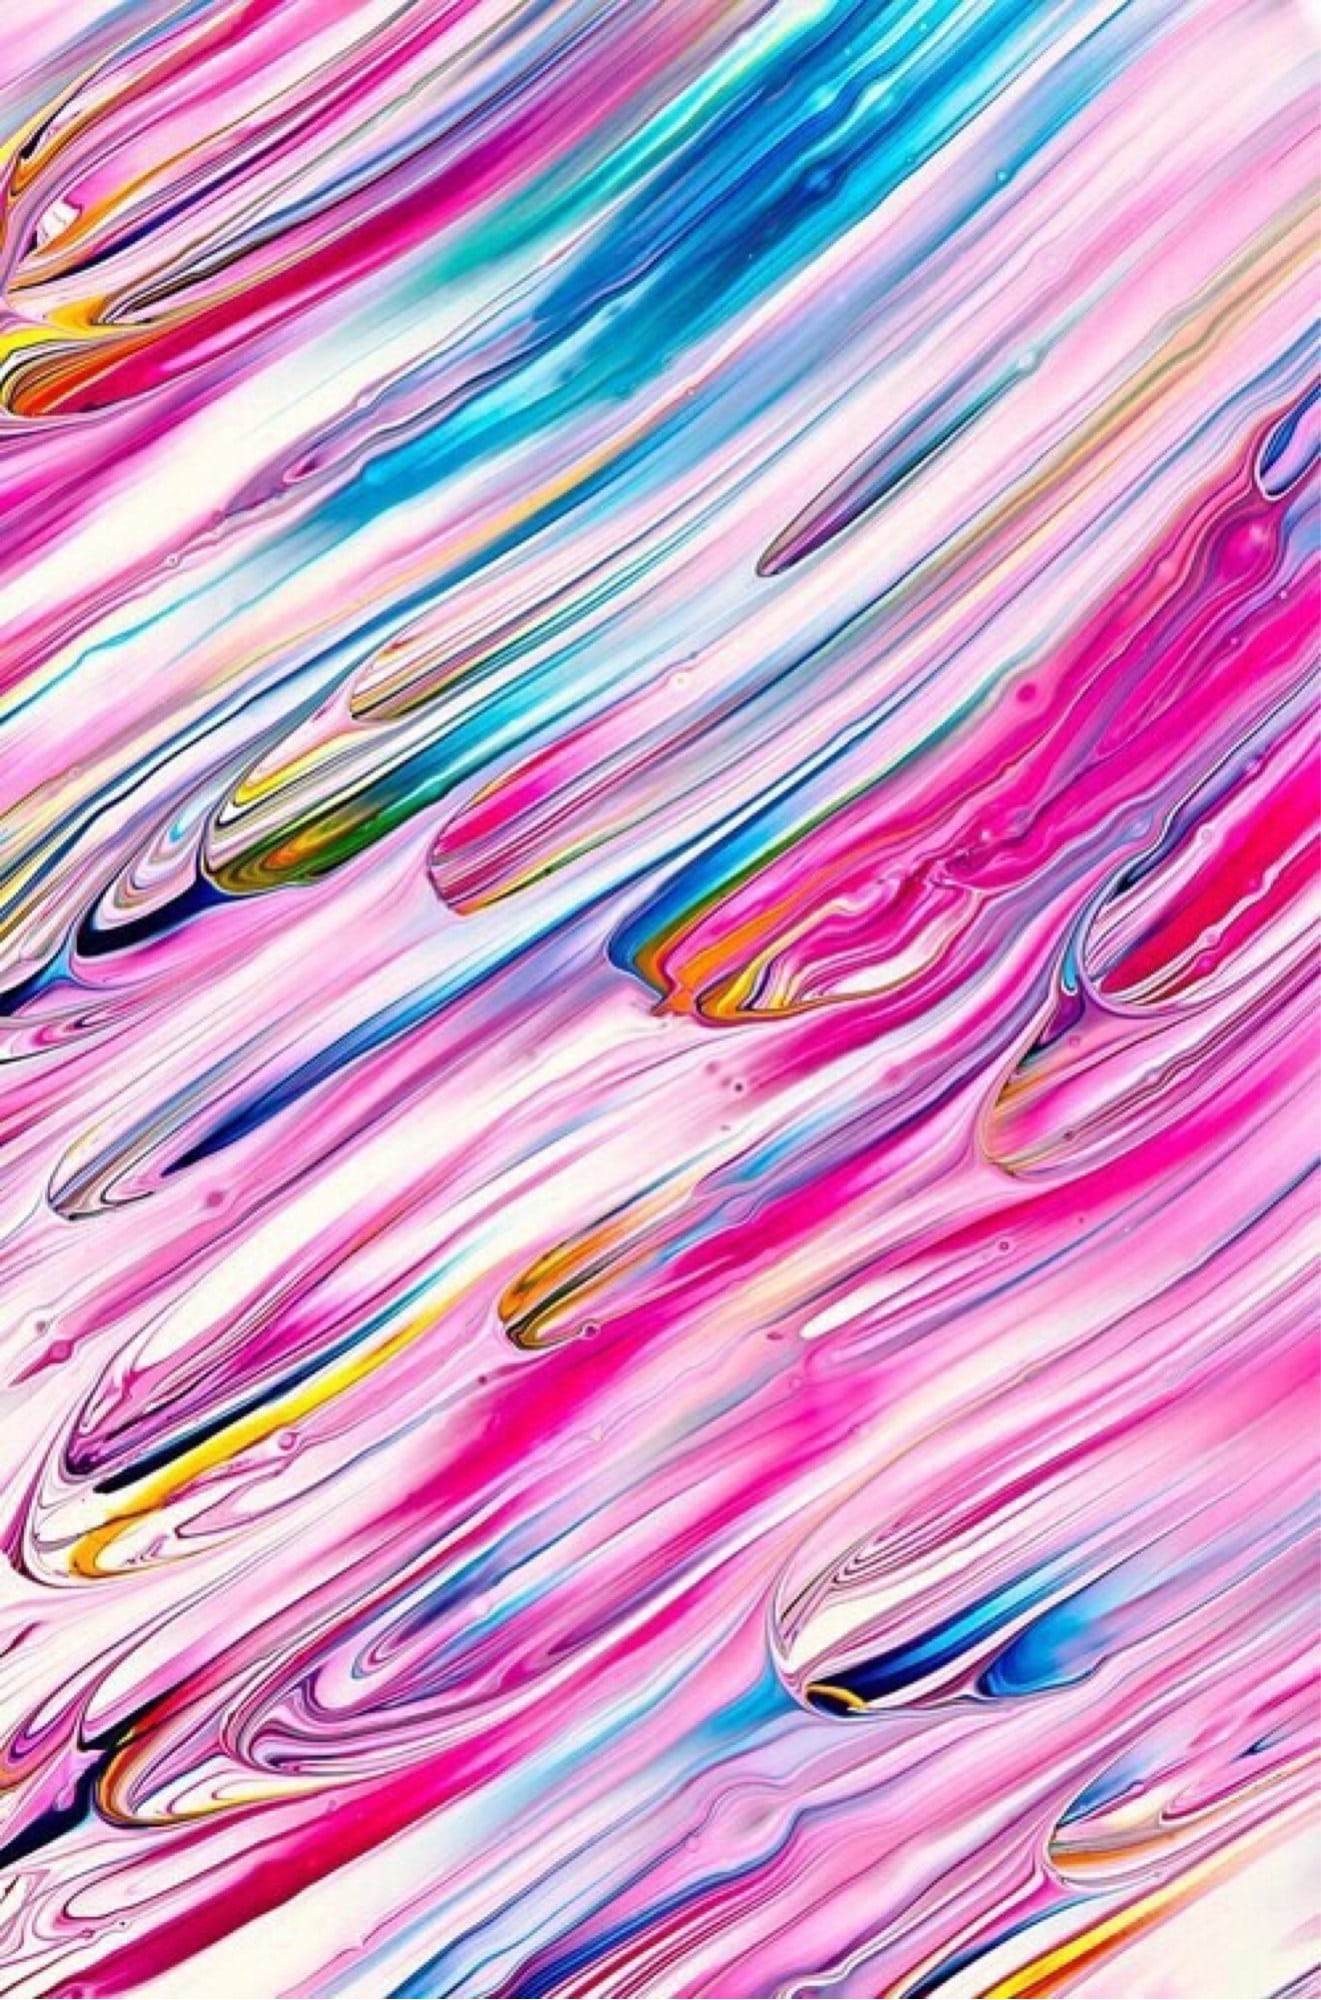 Android Drippy Wallpapers - KoLPaPer - Awesome Free HD Wallpapers